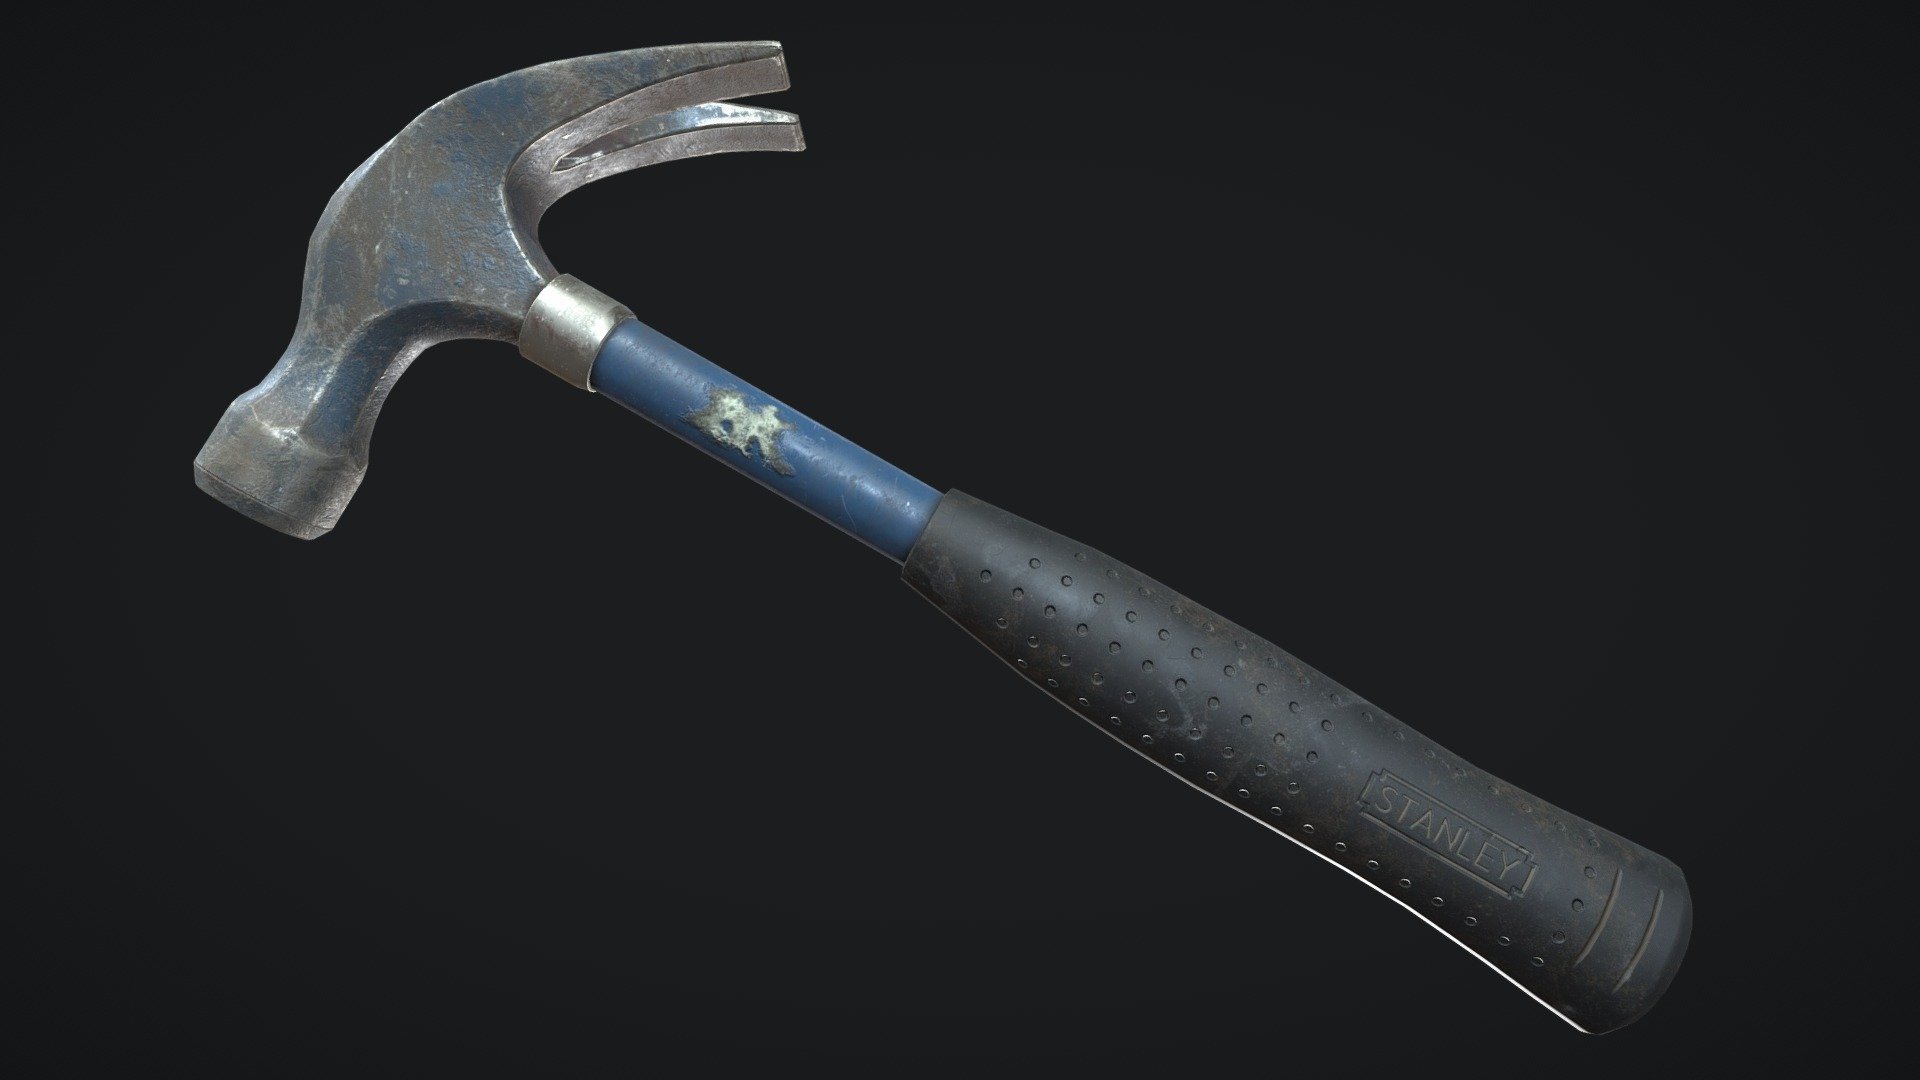 A game ready PBR hammer from my dad his toolbox.
Made in maya and substance painter - PBR Stanley Hammer - 3D model by anoukdks 3d model